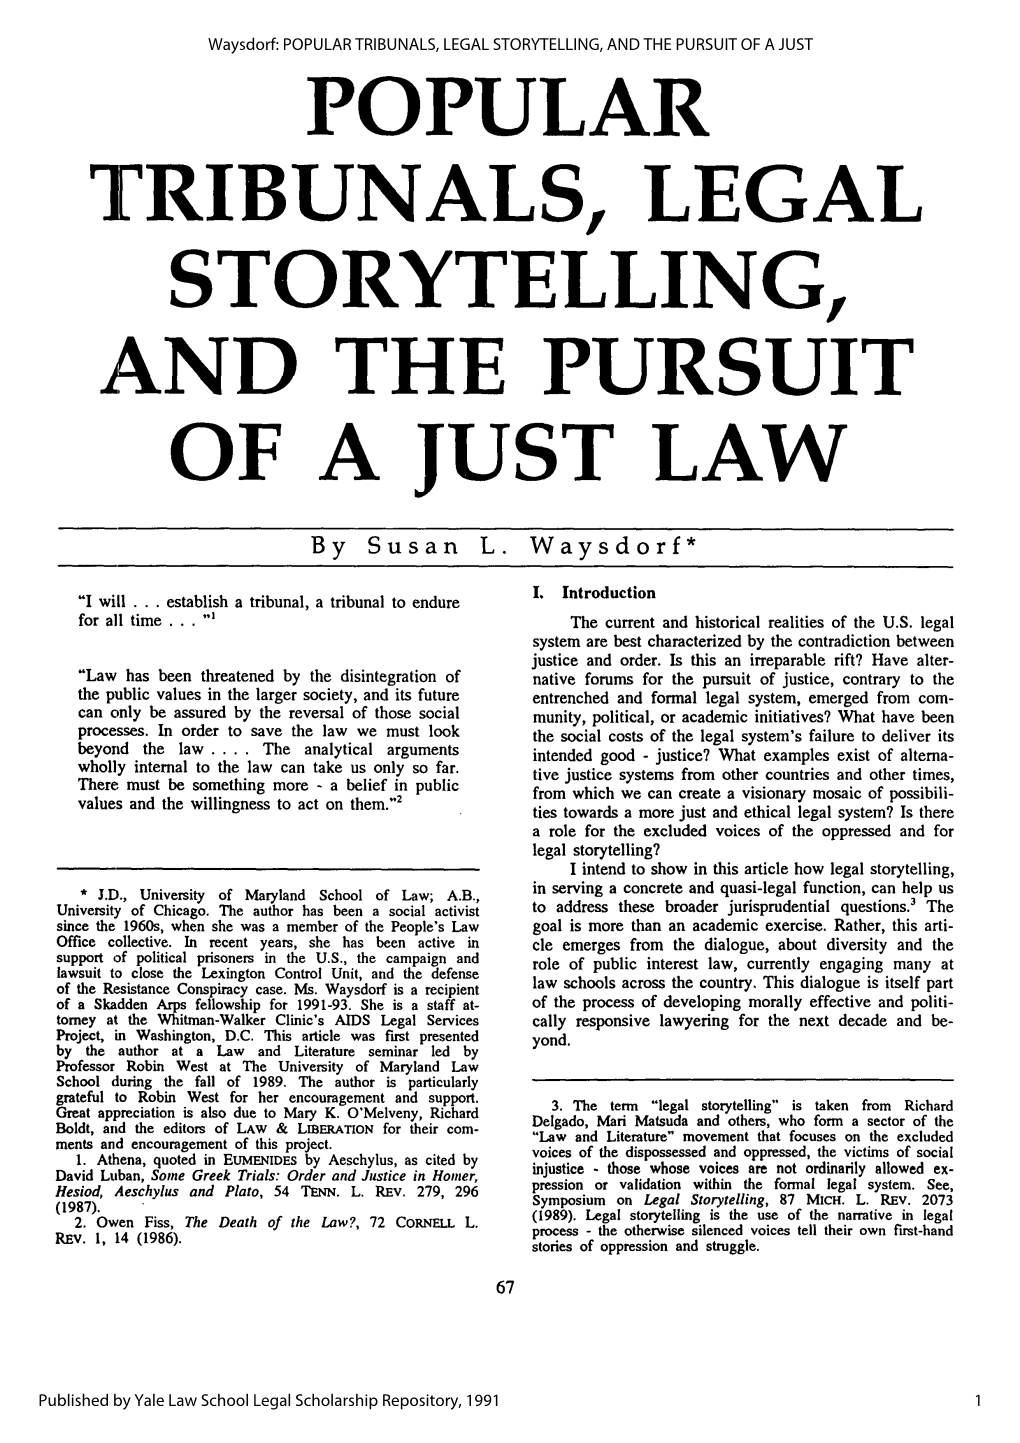 Popular Tribunals, Legal Storytelling, and the Pursuit of a Just Popular Tribunals, Legal Storytelling, and the Pursuit of a Just Law